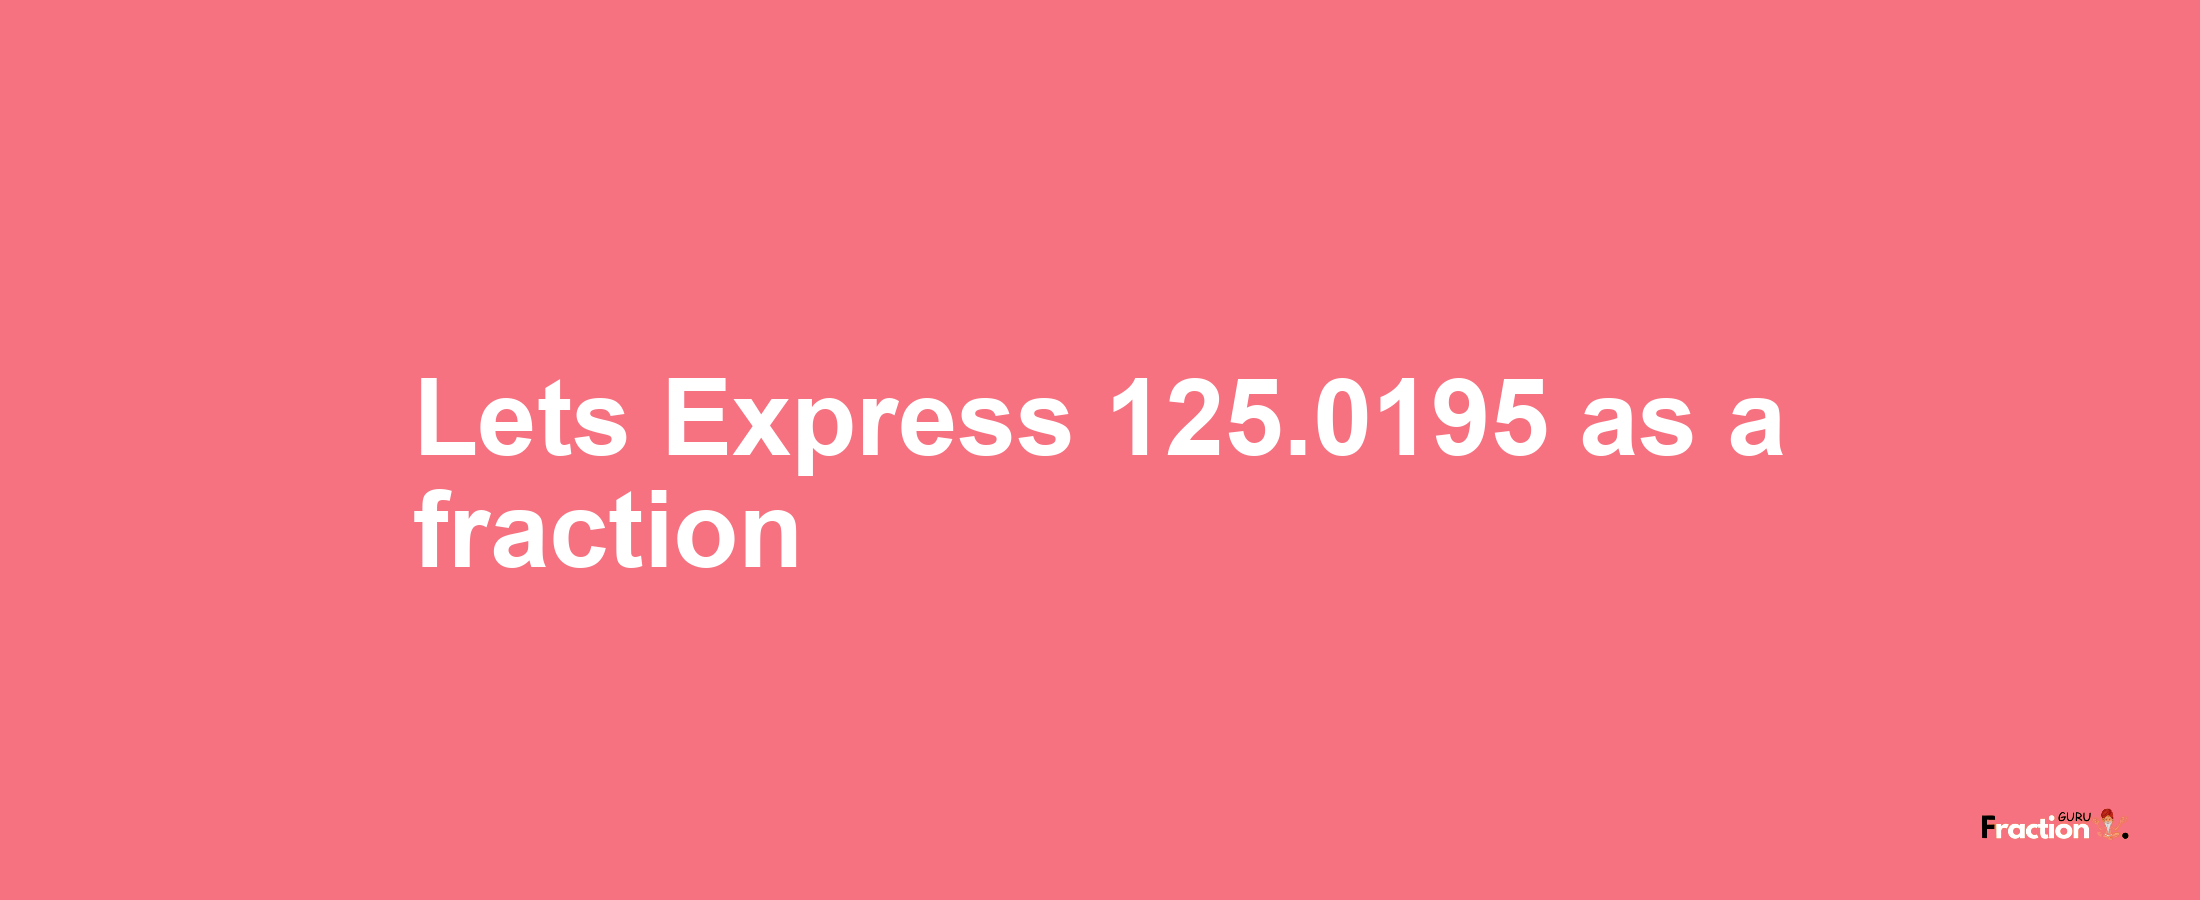 Lets Express 125.0195 as afraction